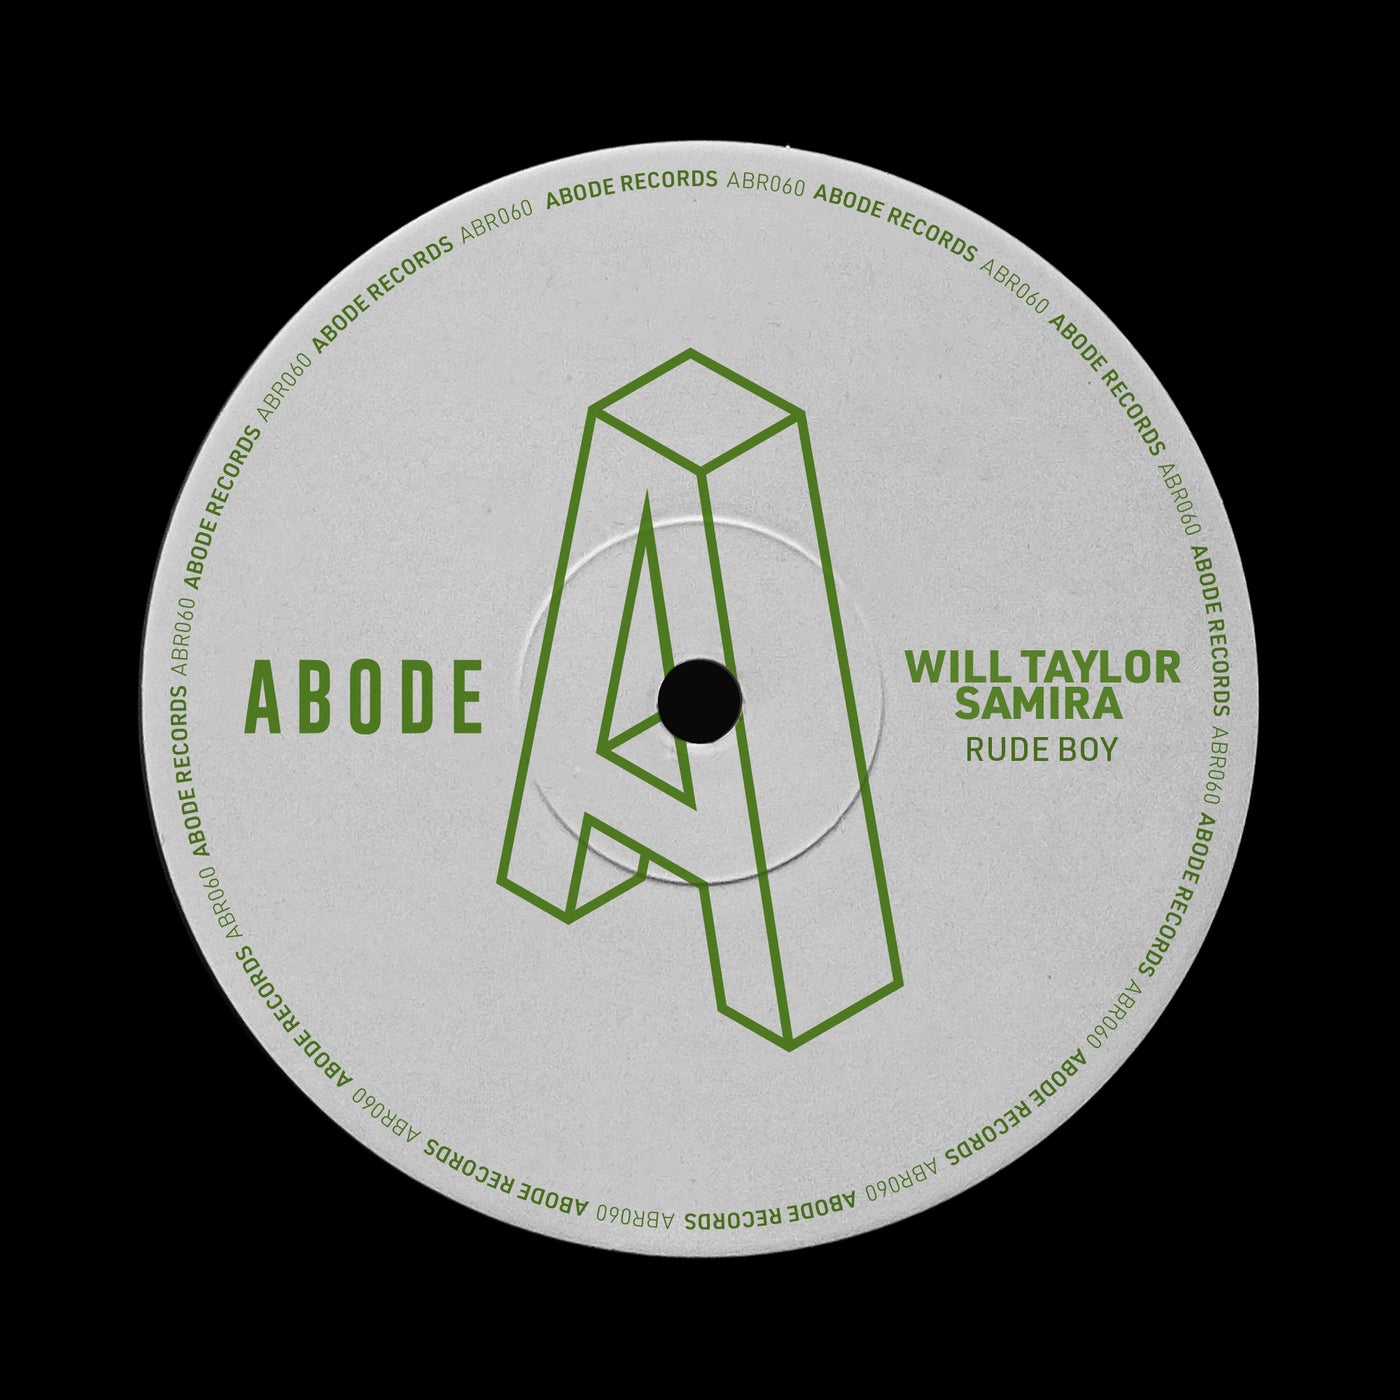 image cover: Samira, Will Taylor (UK) - Rude Boy on ABODE Records